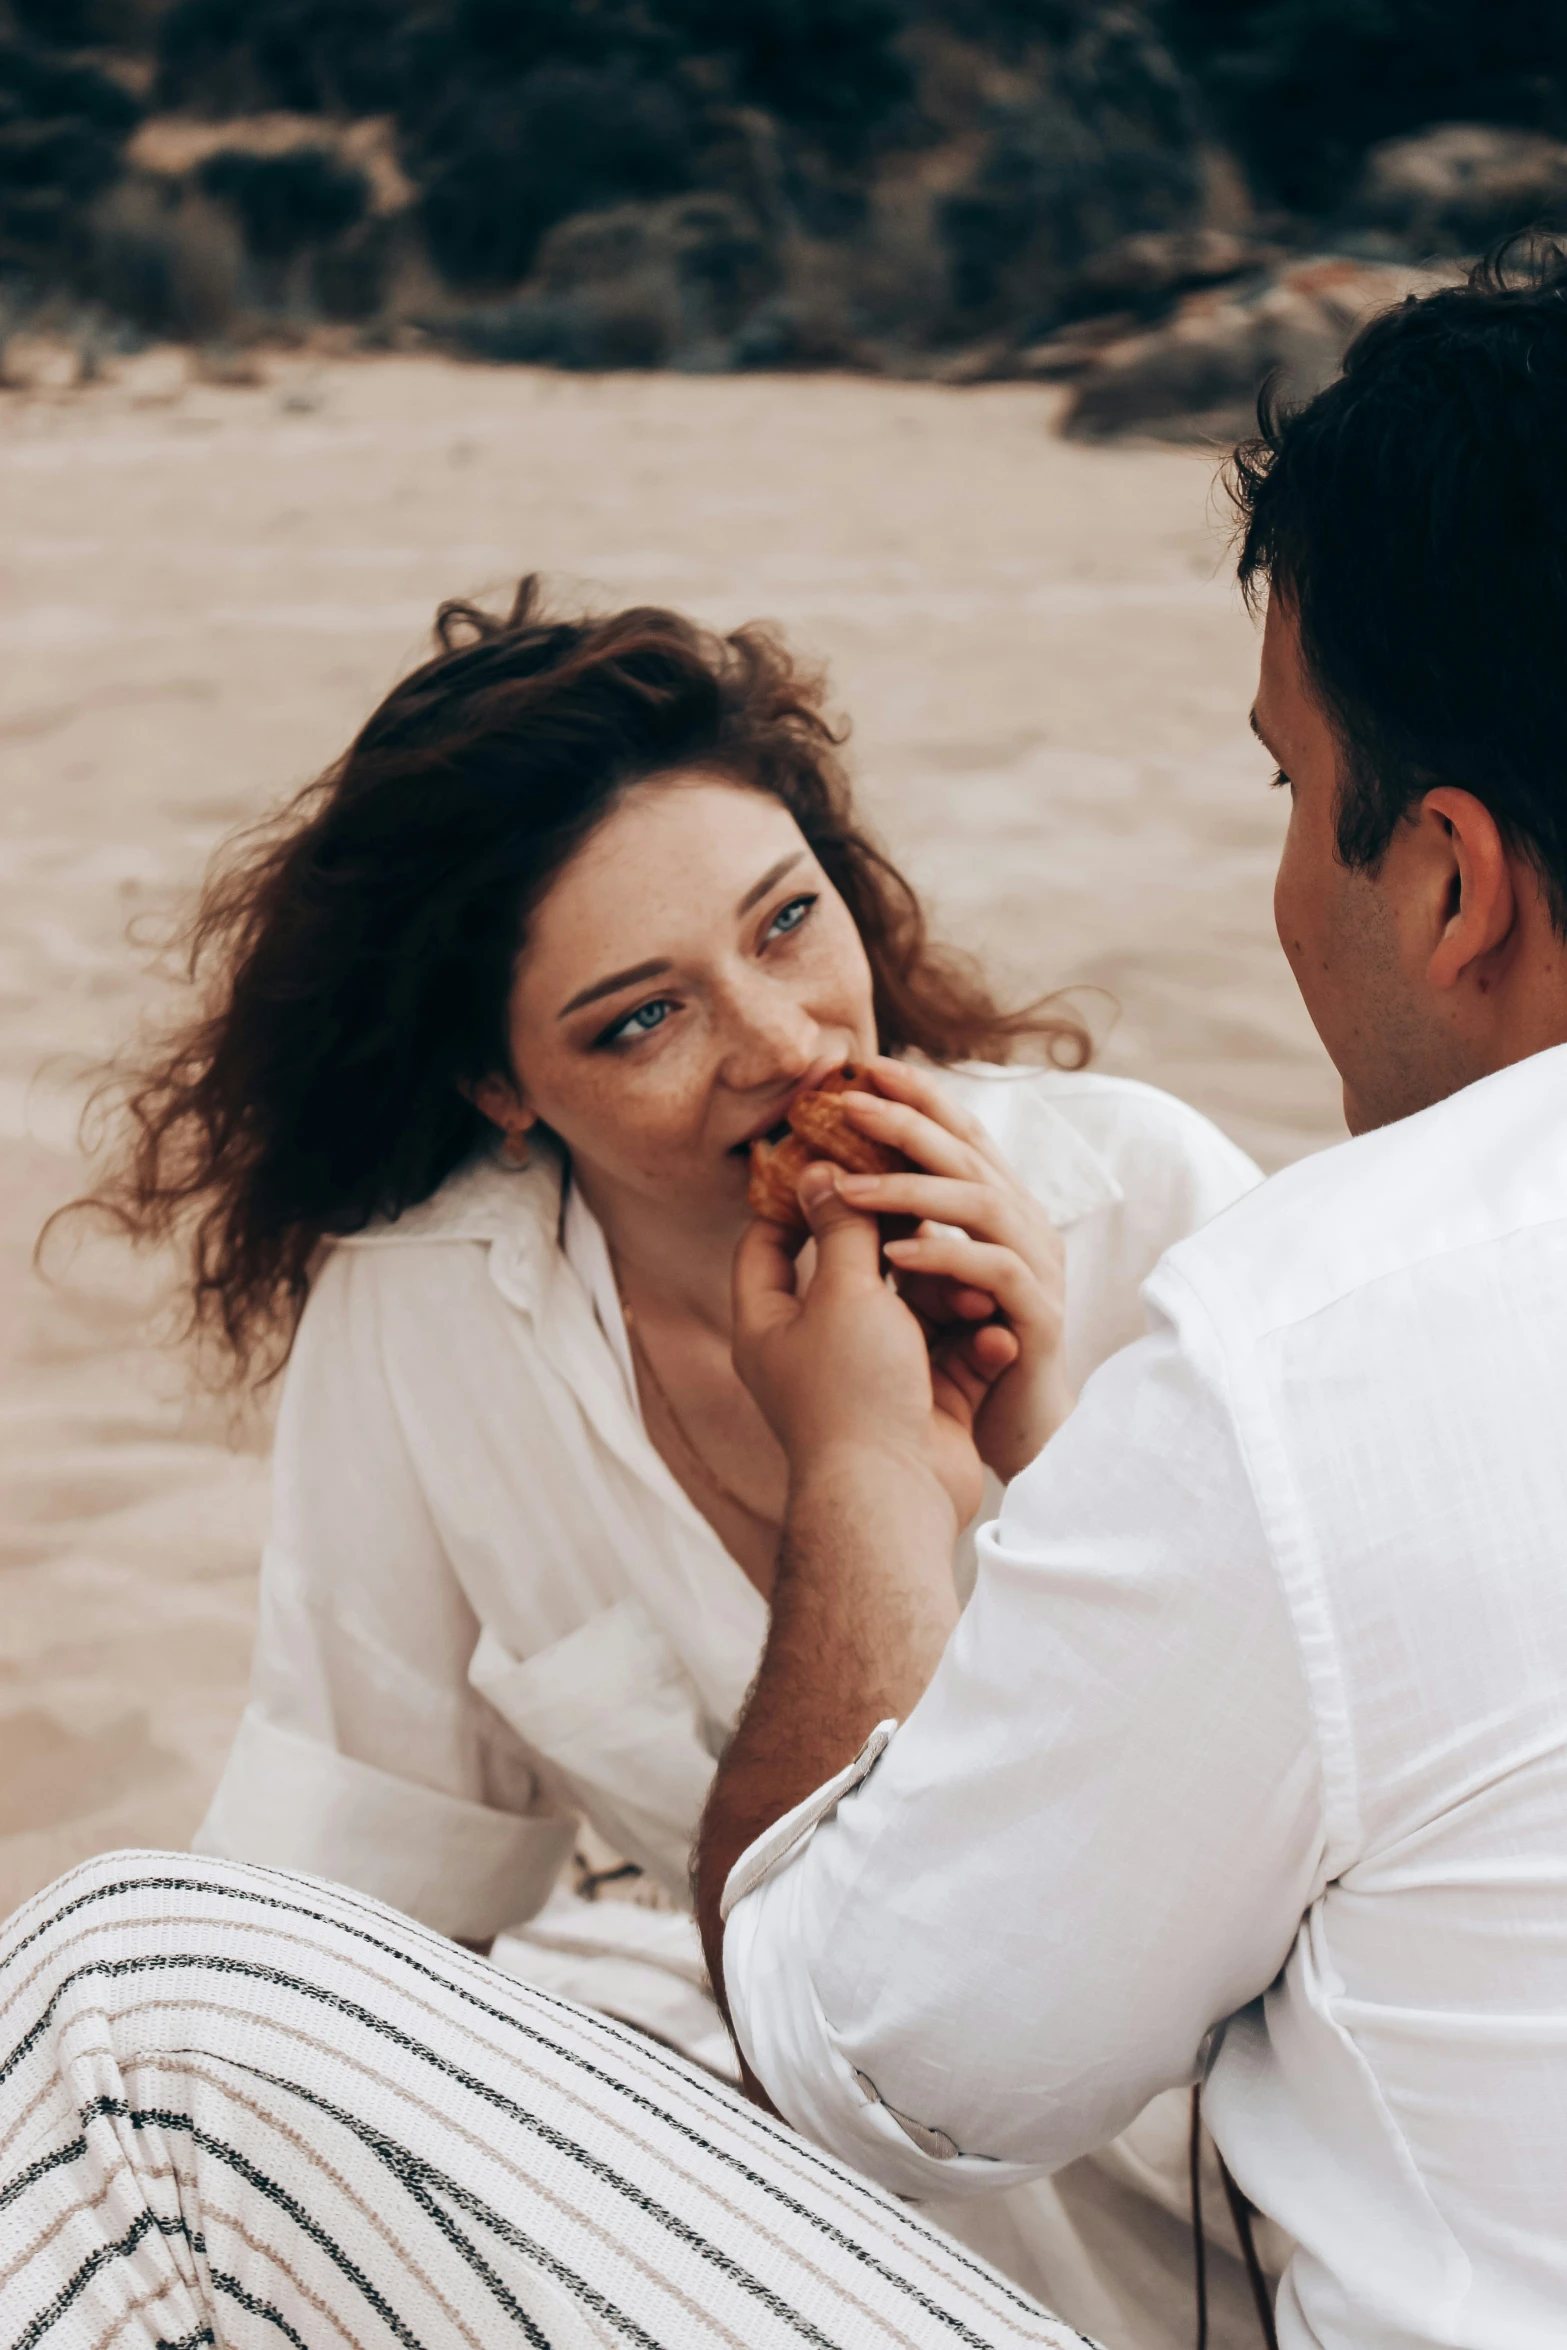 two people sitting on the sand, one of them eating soing